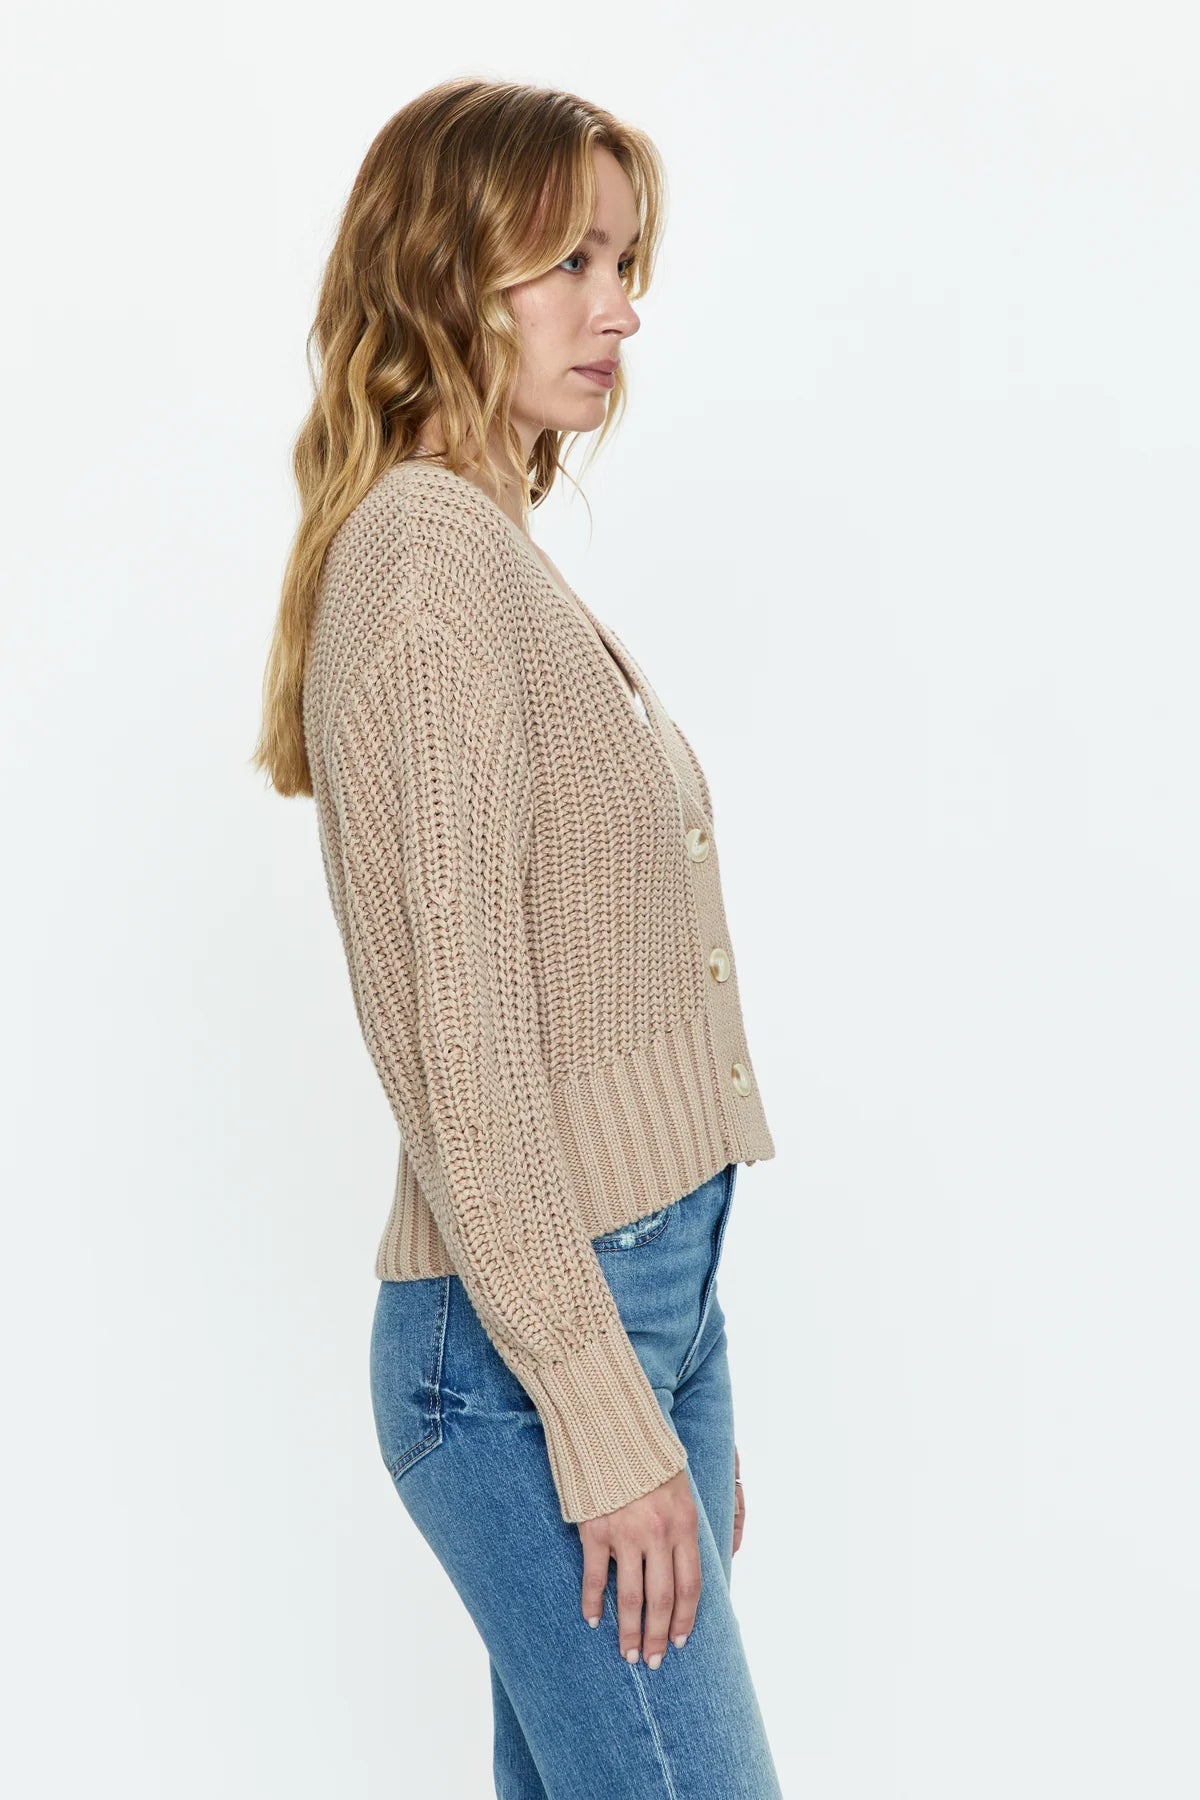 Mallory Cardigan in Sable *FINAL SALE*